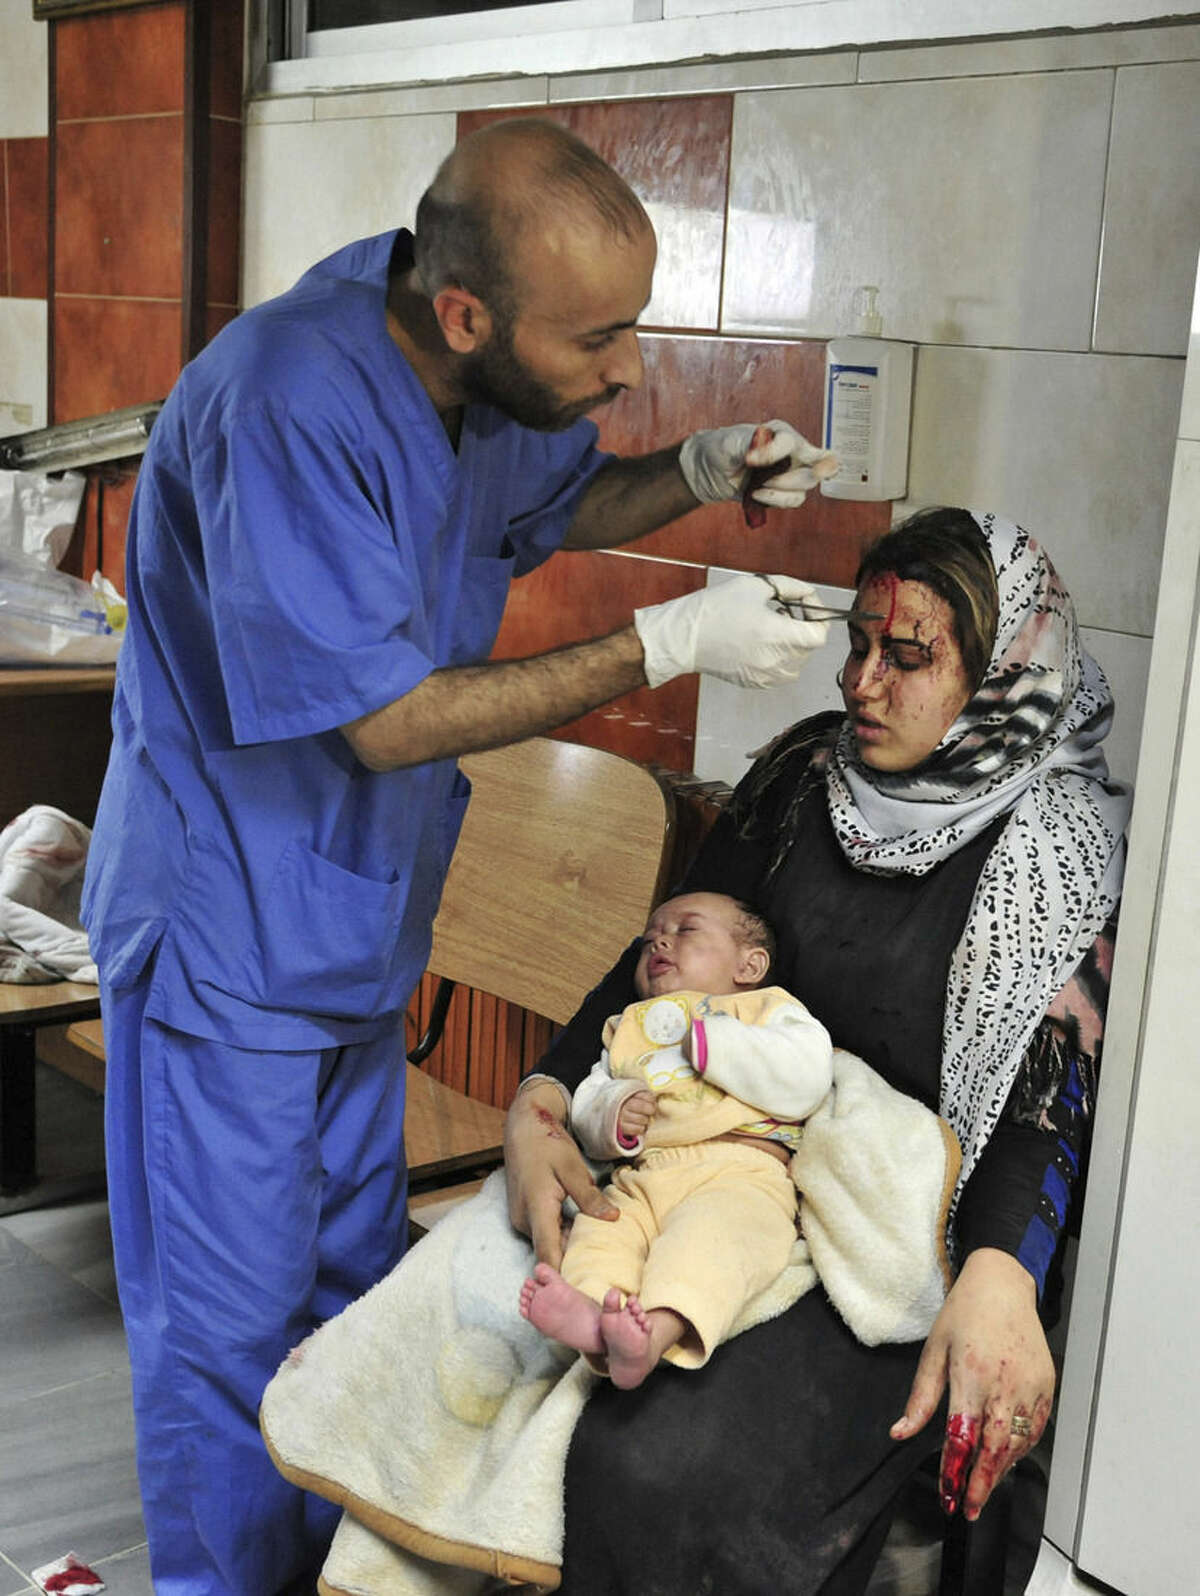 In this photo released by the Syrian official news agency SANA, an injured victim of the triple blast in Sayyida Zeinab, a predominantly Shiite Muslim suburb of the Syrian capital Damascus arrives to a hospital to receive treatment, Syria, Sunday, Feb. 21, 2016. The Islamic State group claimed responsibility for a triple blast in the Shiite suburb, saying two IS fighters set off a car bomb before detonating their explosive belts and killing dozens. (SANA via AP)